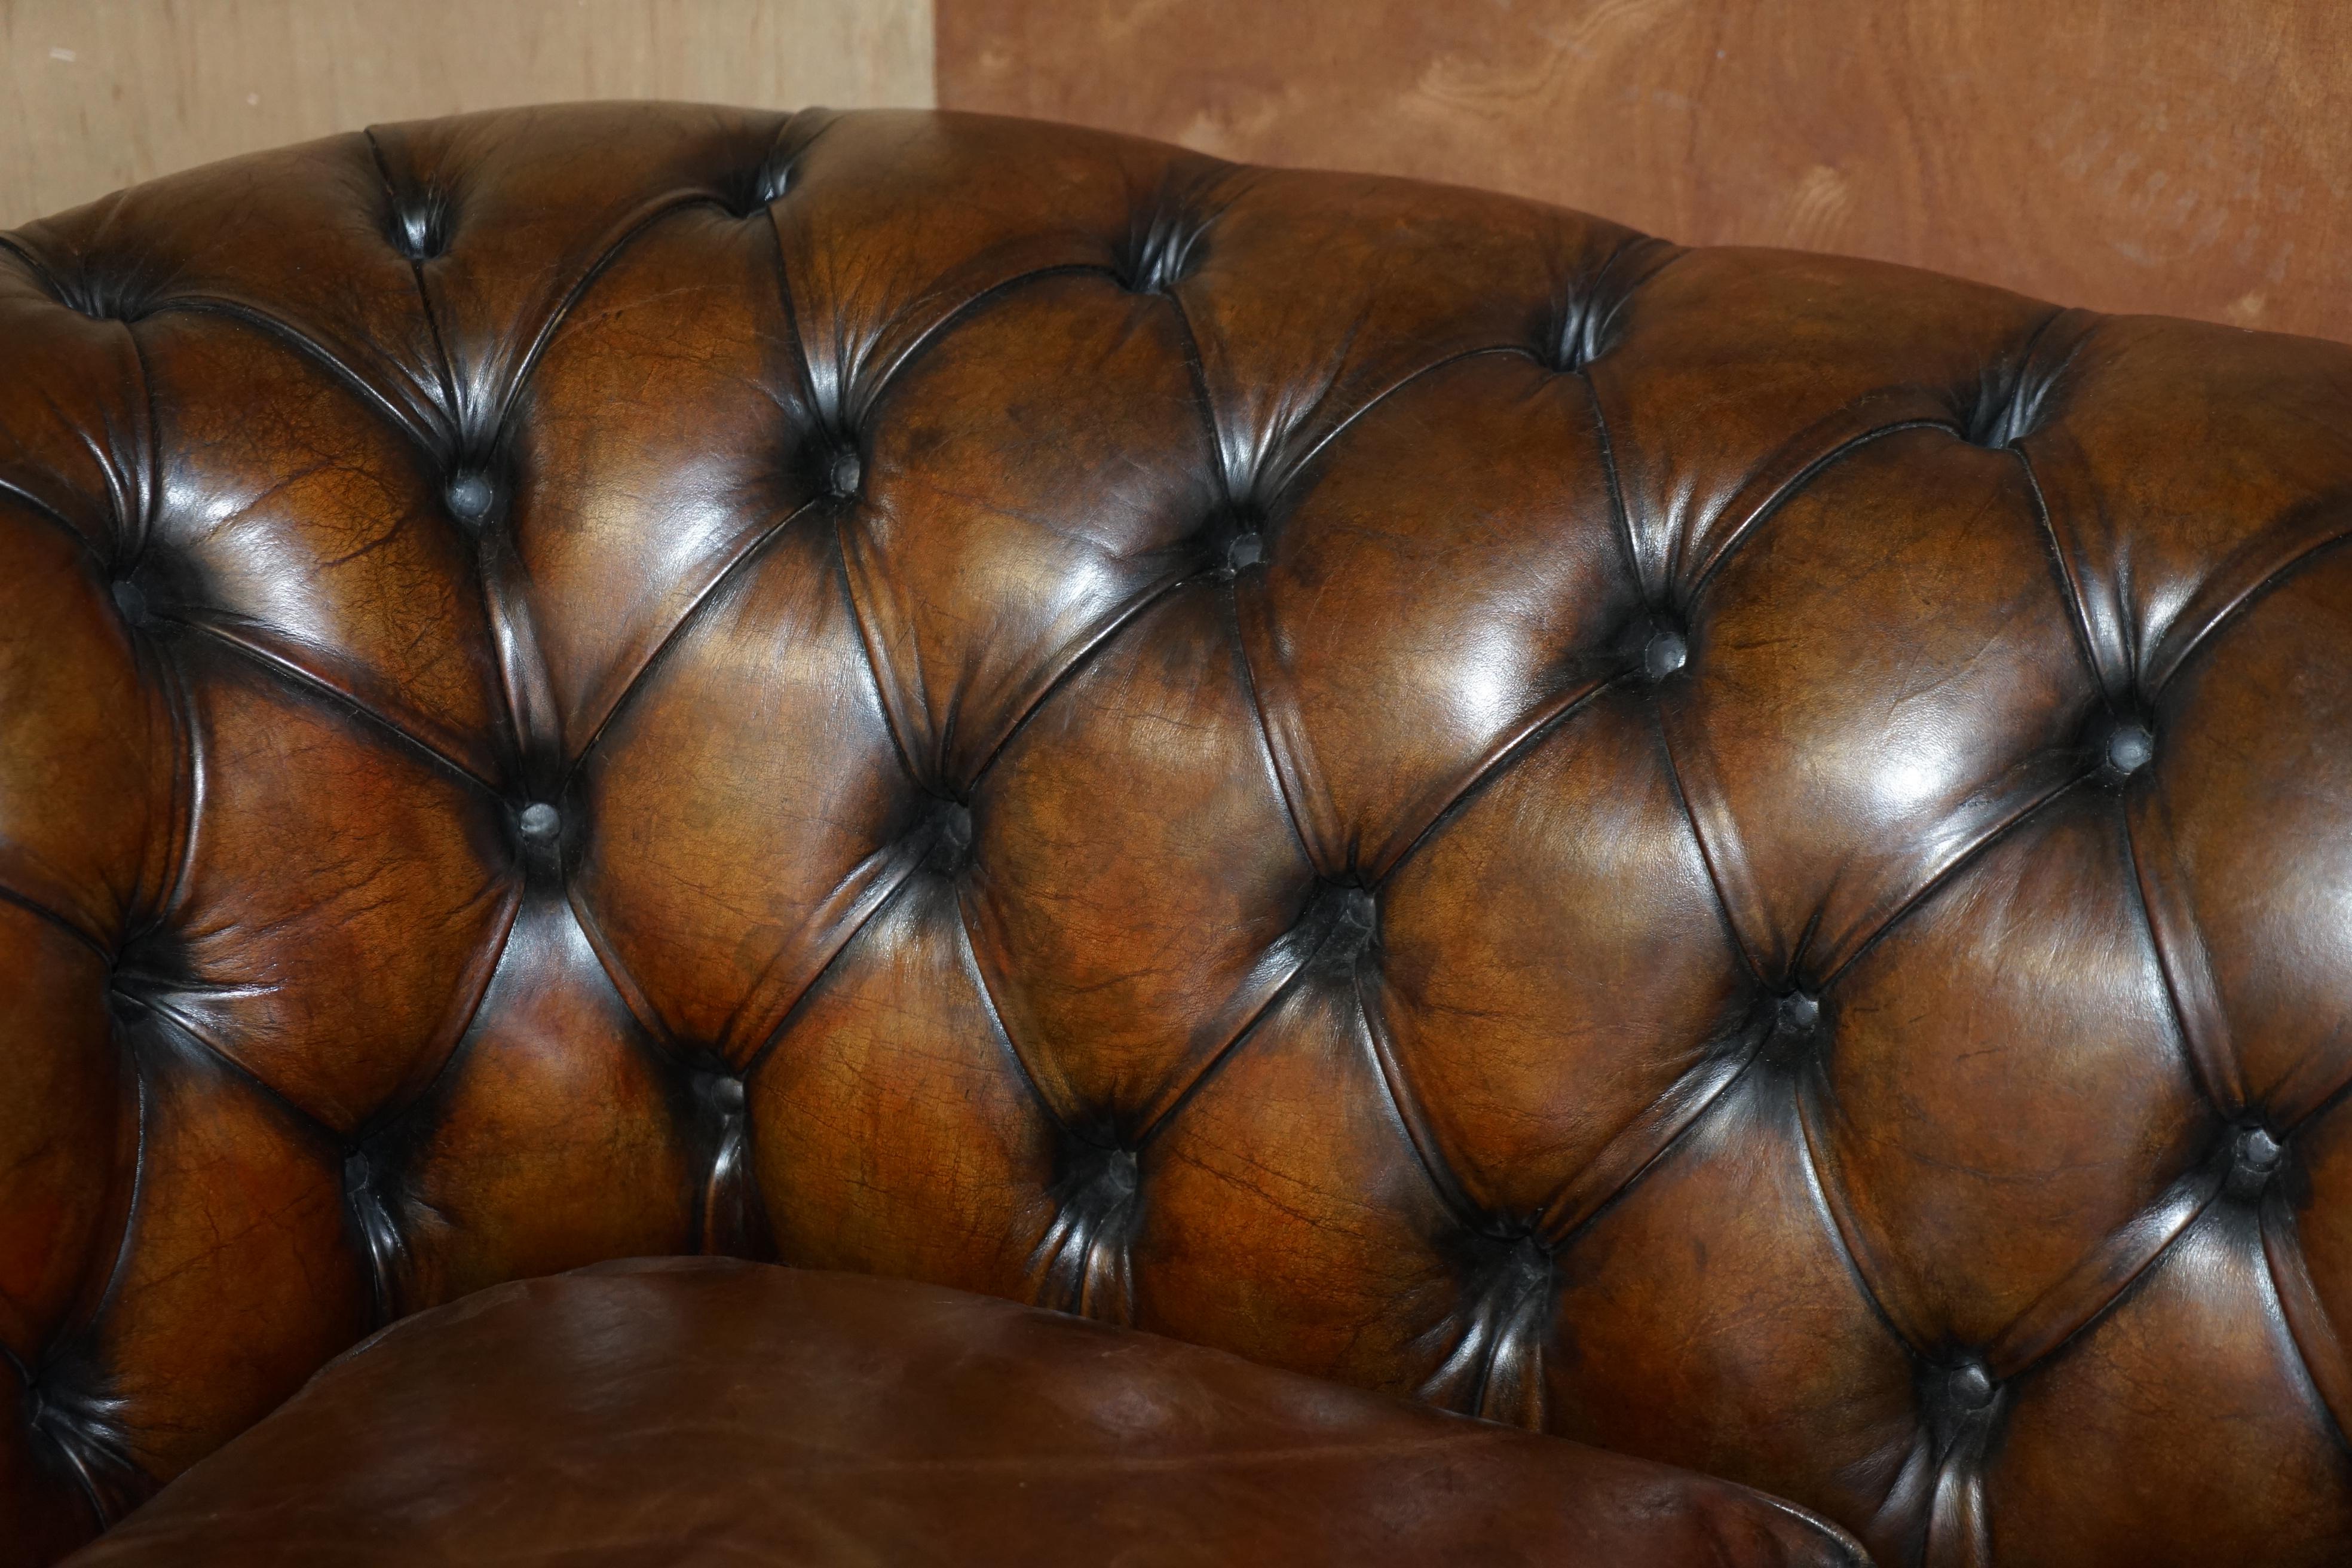 English Stunning Antique Fully Restored Cigar Brown Leather Chesterfield Sofa Walnut For Sale